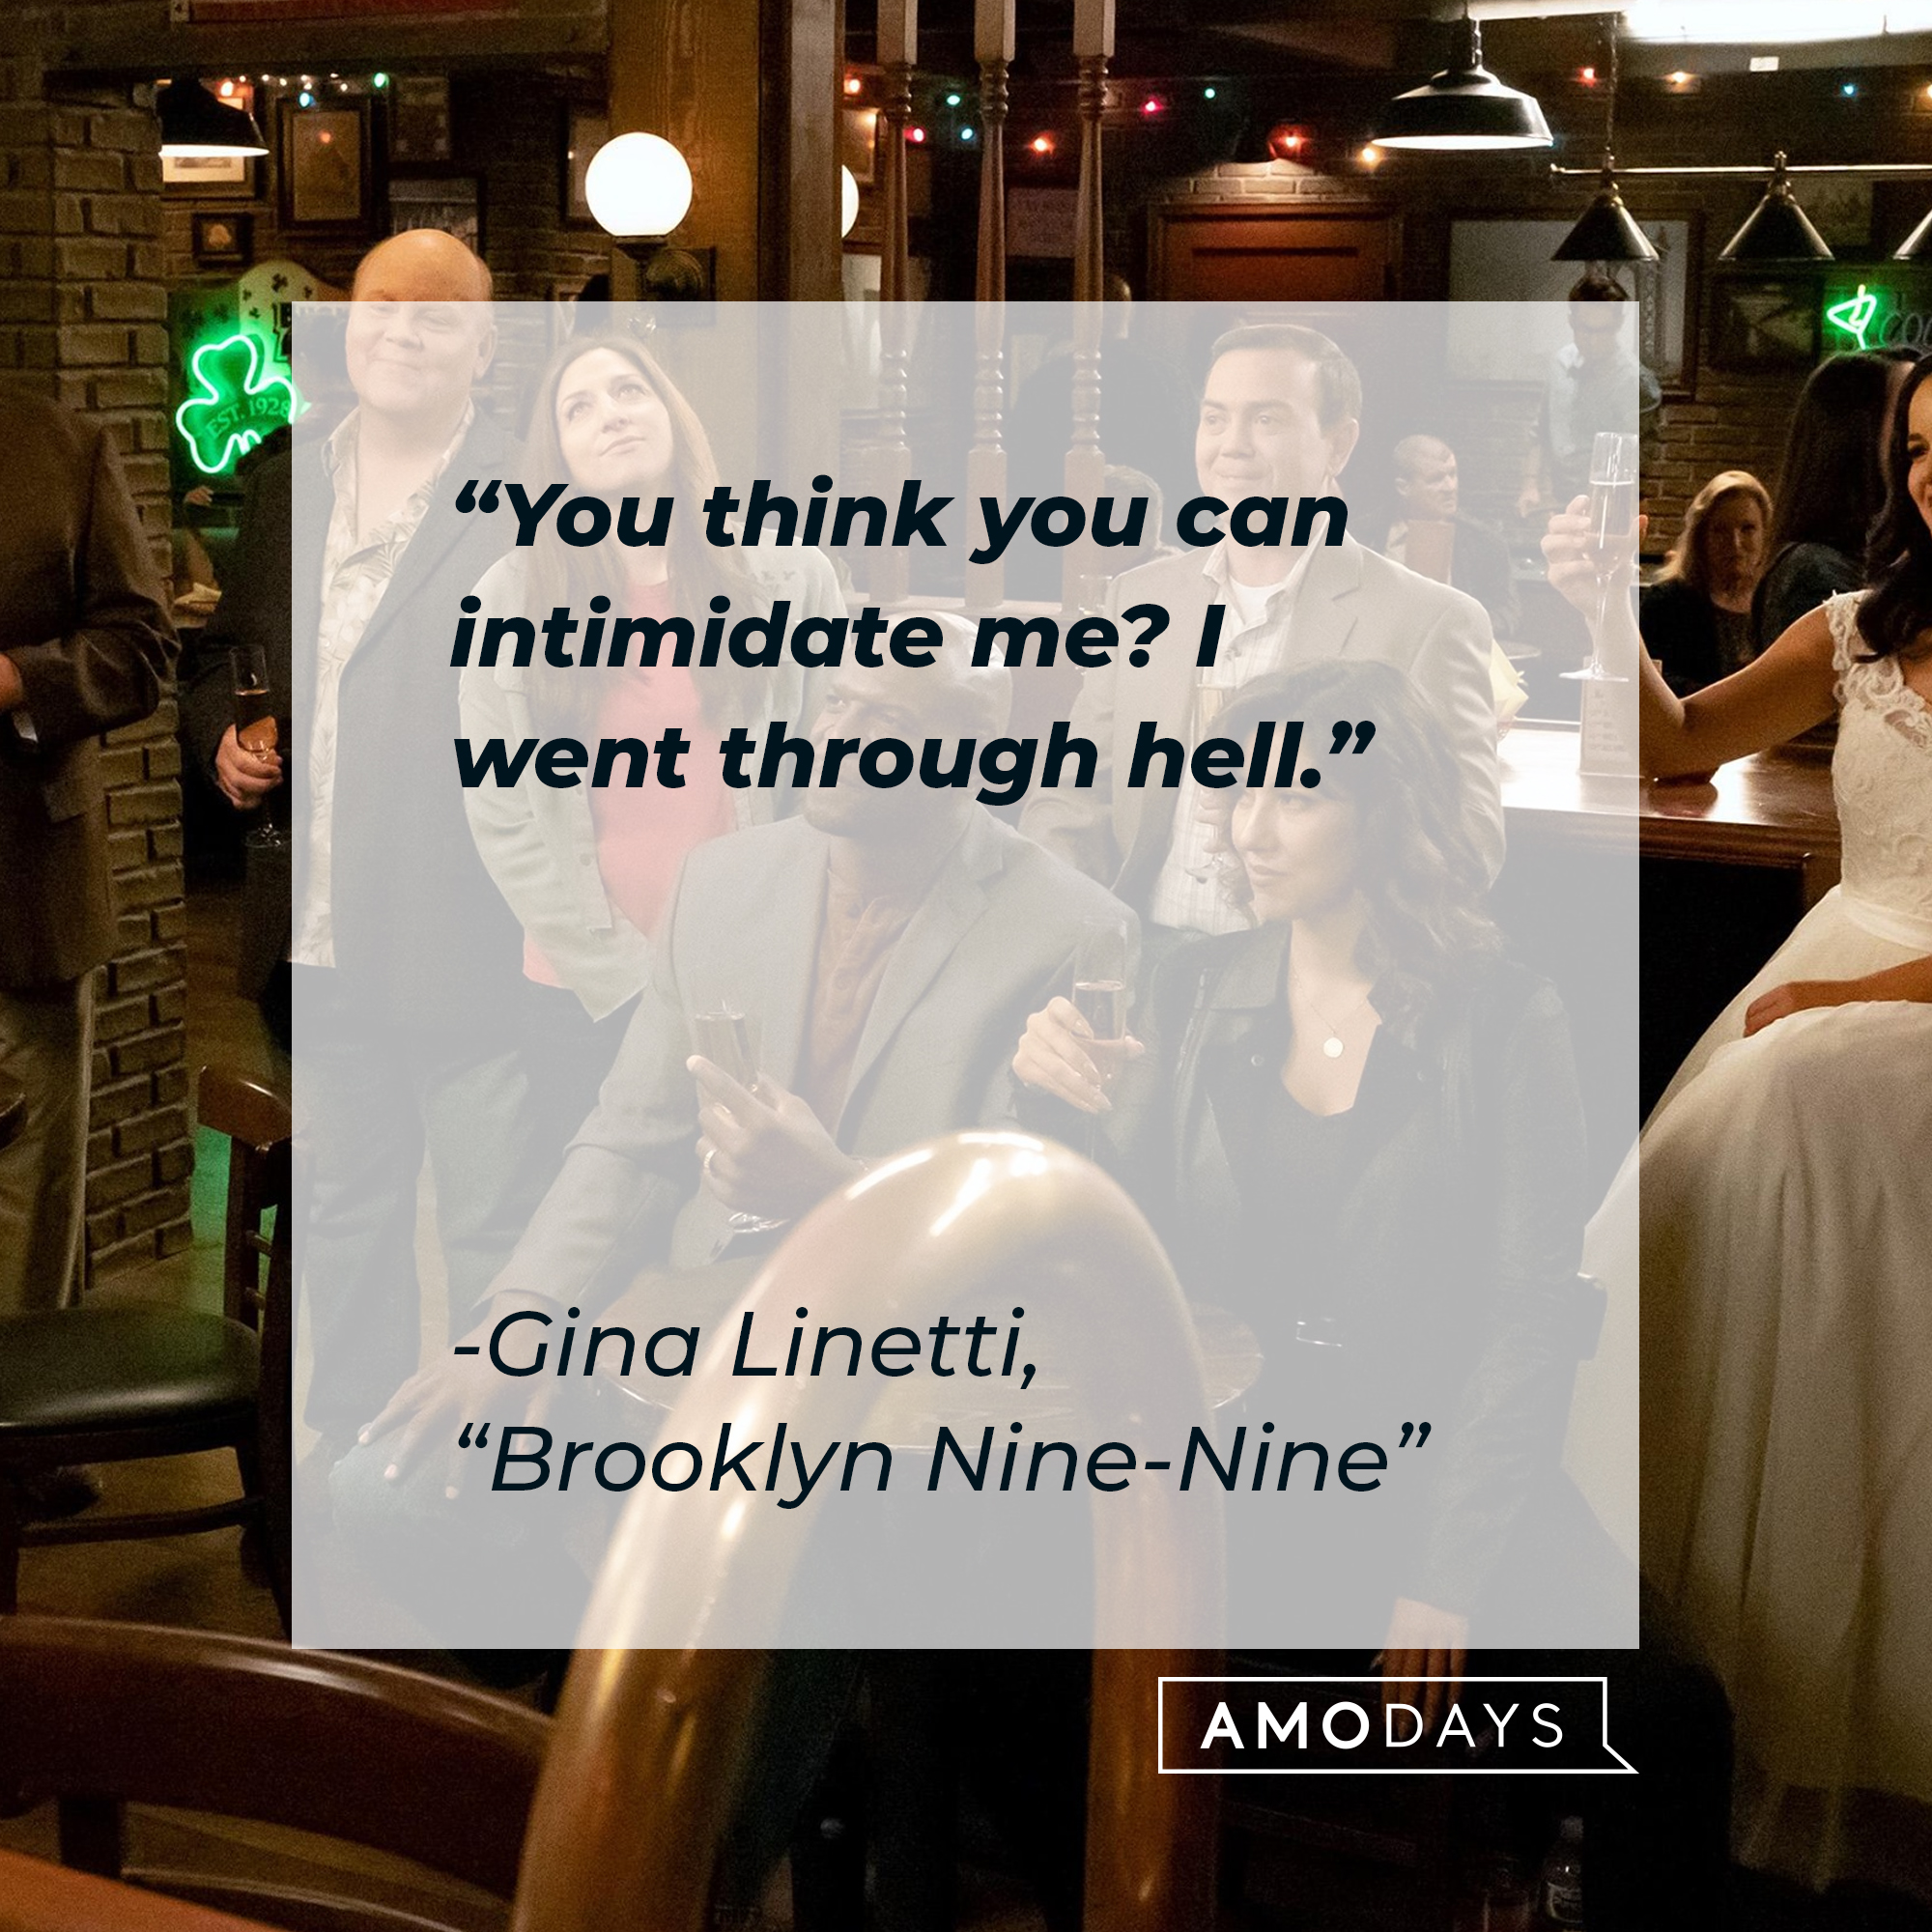 Gina Linetti with her quote: "You think you can intimidate me? I went through hell." | Source: Facebook.com/BrooklynNineNine